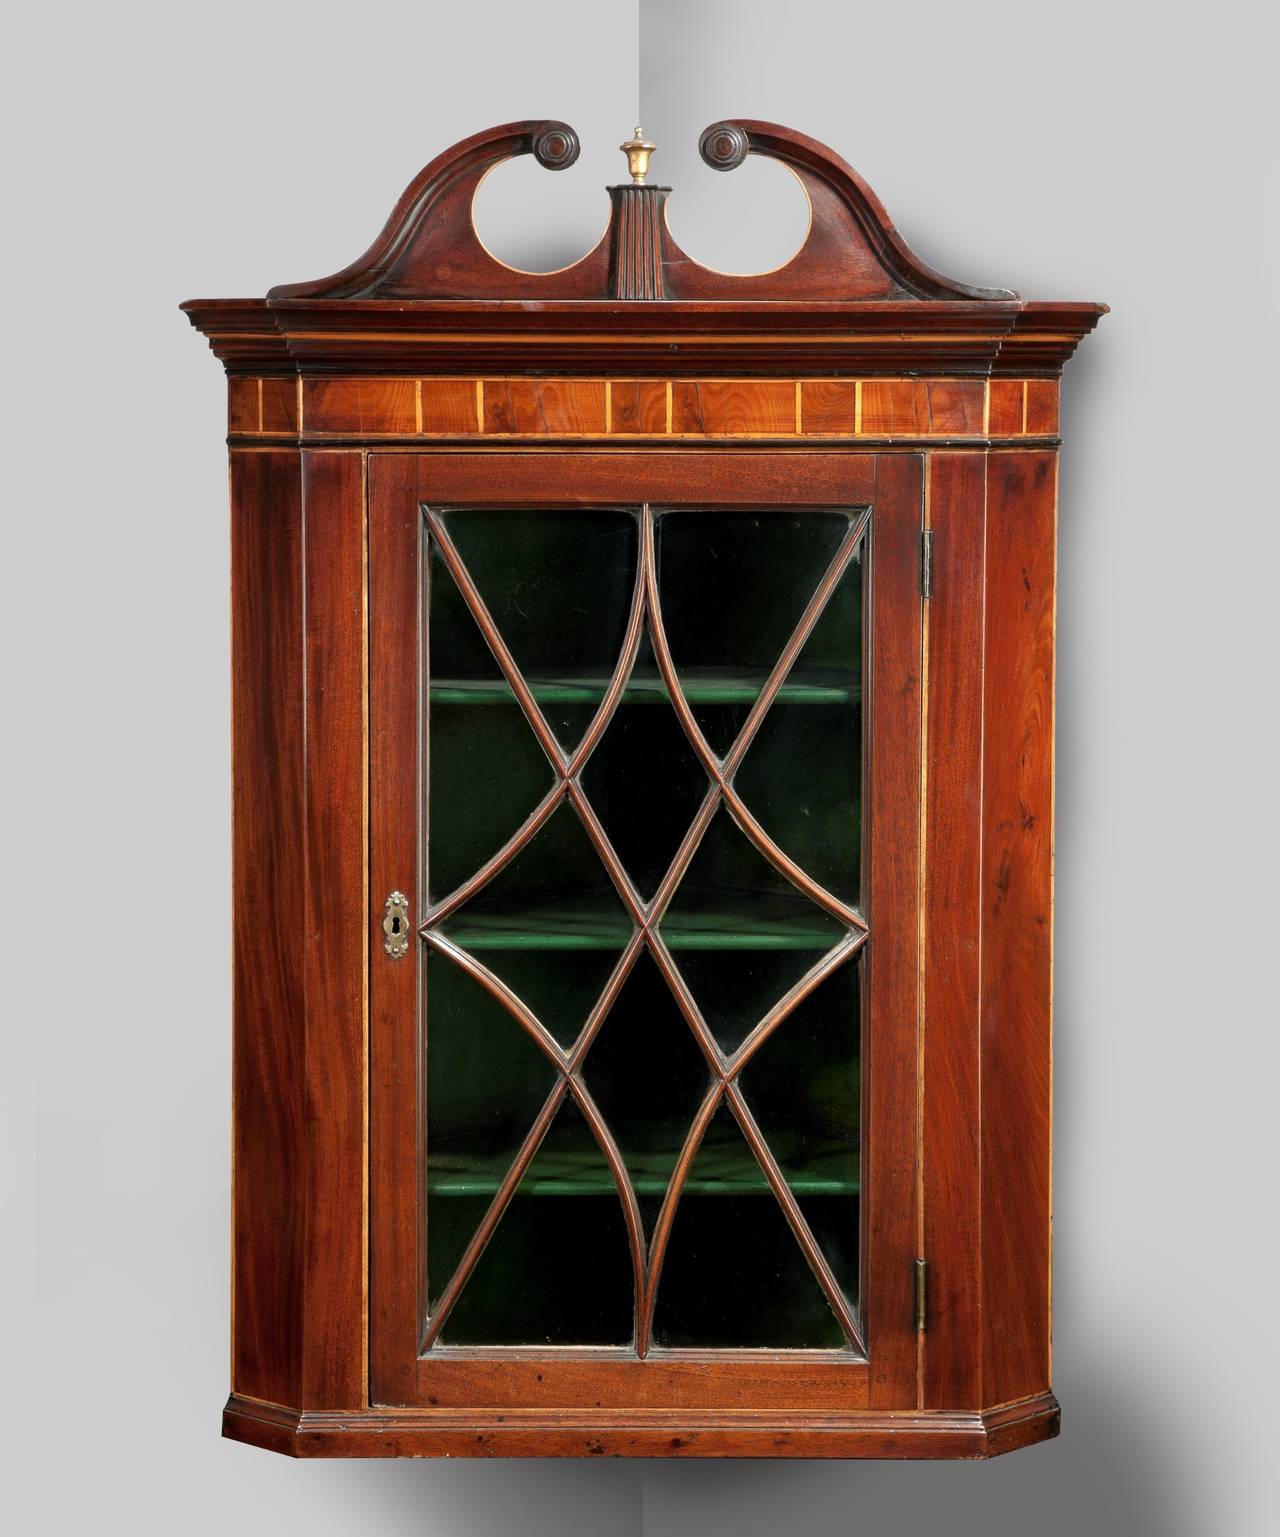 A George III Sheraton period mahogany hanging corner cupboard; the swan neck pediment above a boxwood strung cornice; the glazed door with an elegant astragal. 

For more information on the Sheraton period please read this article on our blog.